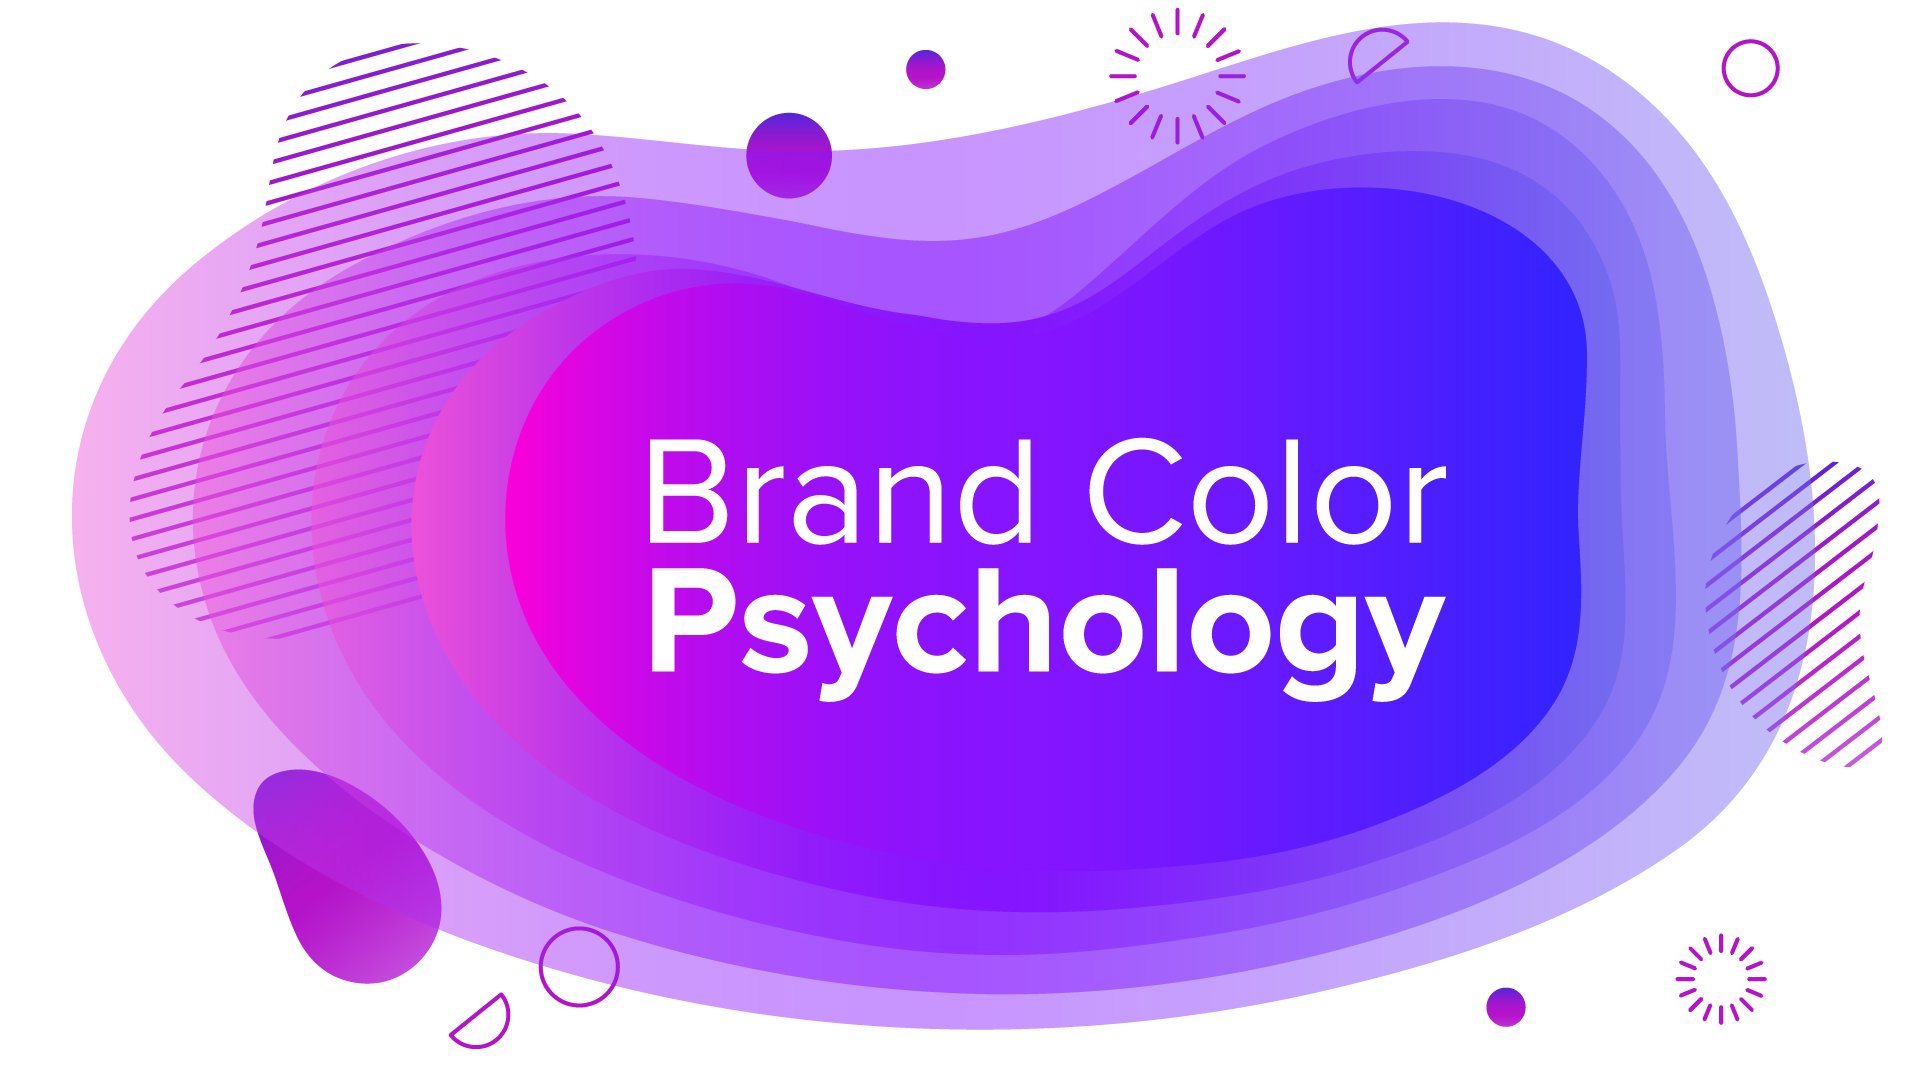 Role of Branding Color: The color Psychology